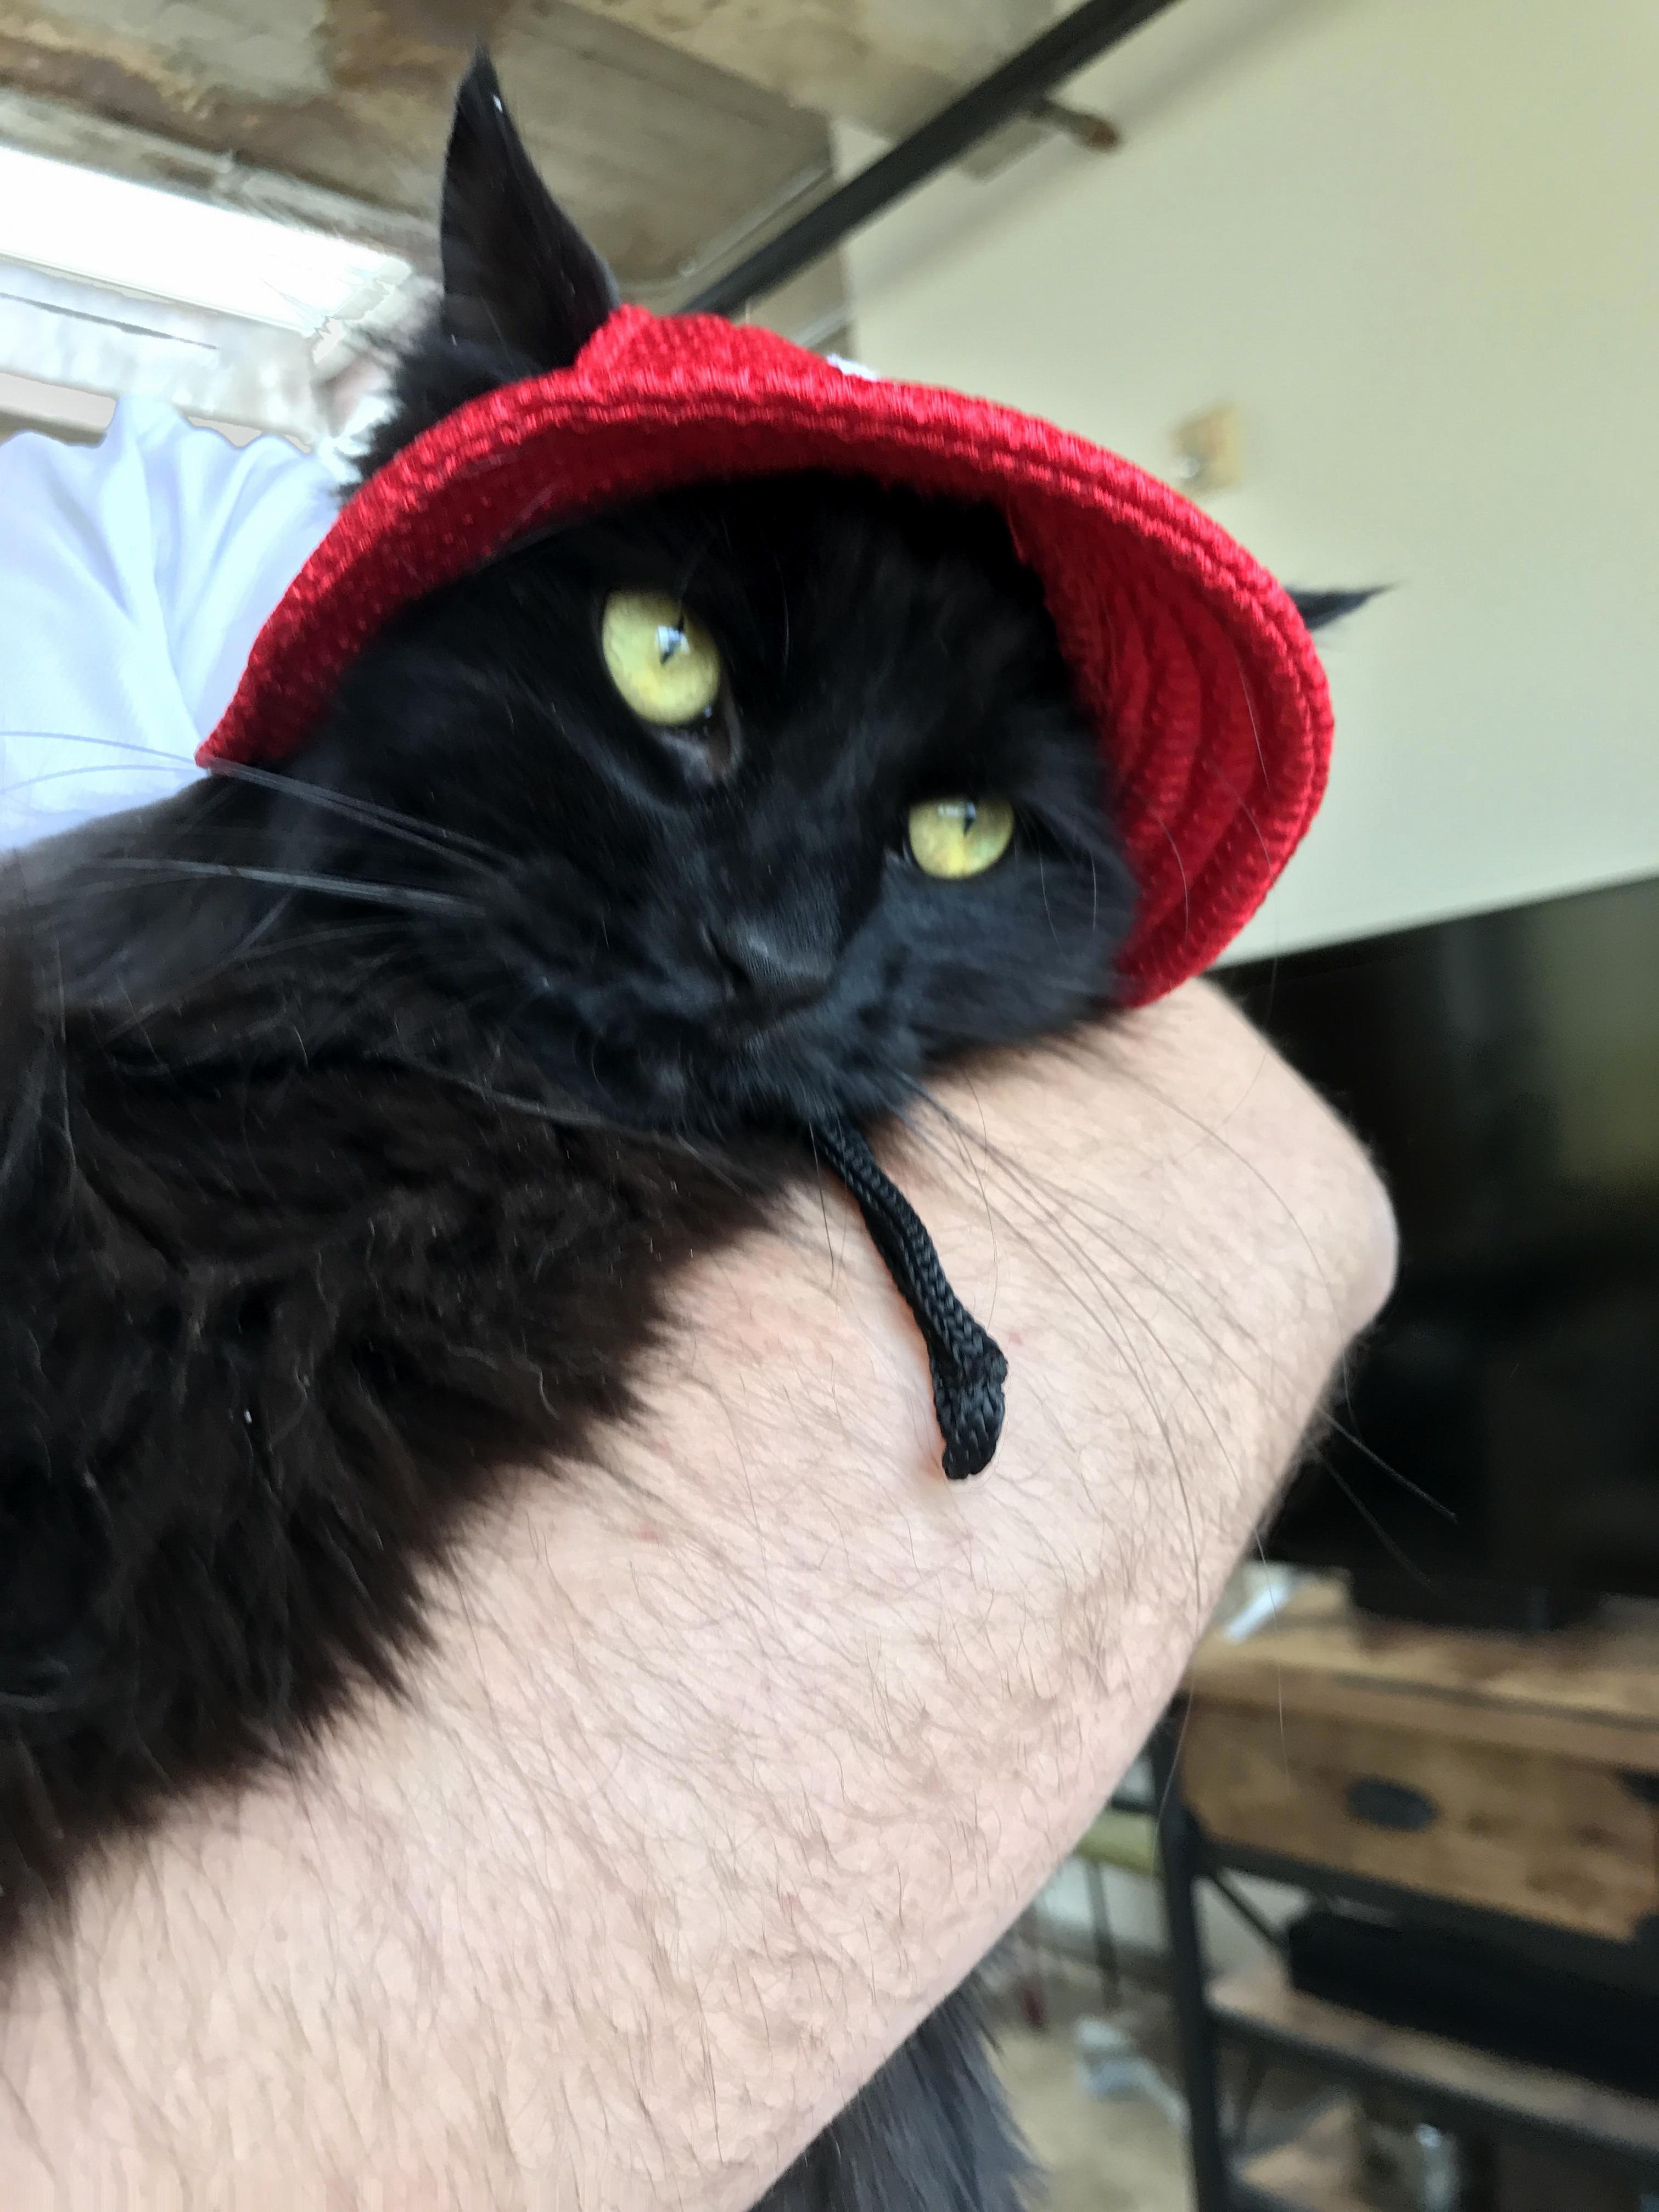 Bought ranger a gardening hat off a sketchy instagram page. not disappointed in the slightest.